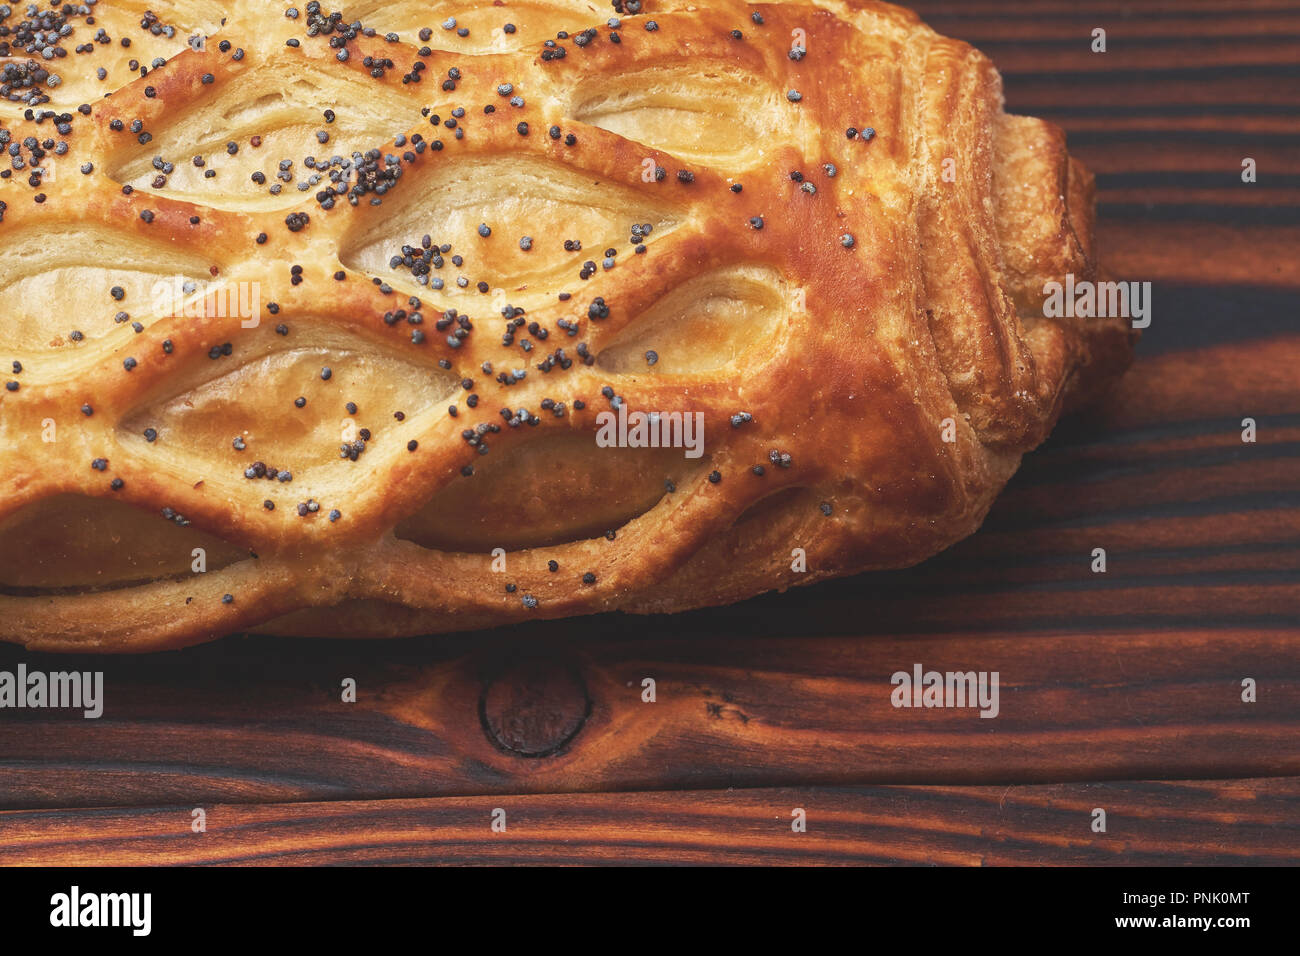 Baked bun with flaky pastry sprinkled with poppy seeds on a dark wooden background. Close-up. Food background. Stock Photo